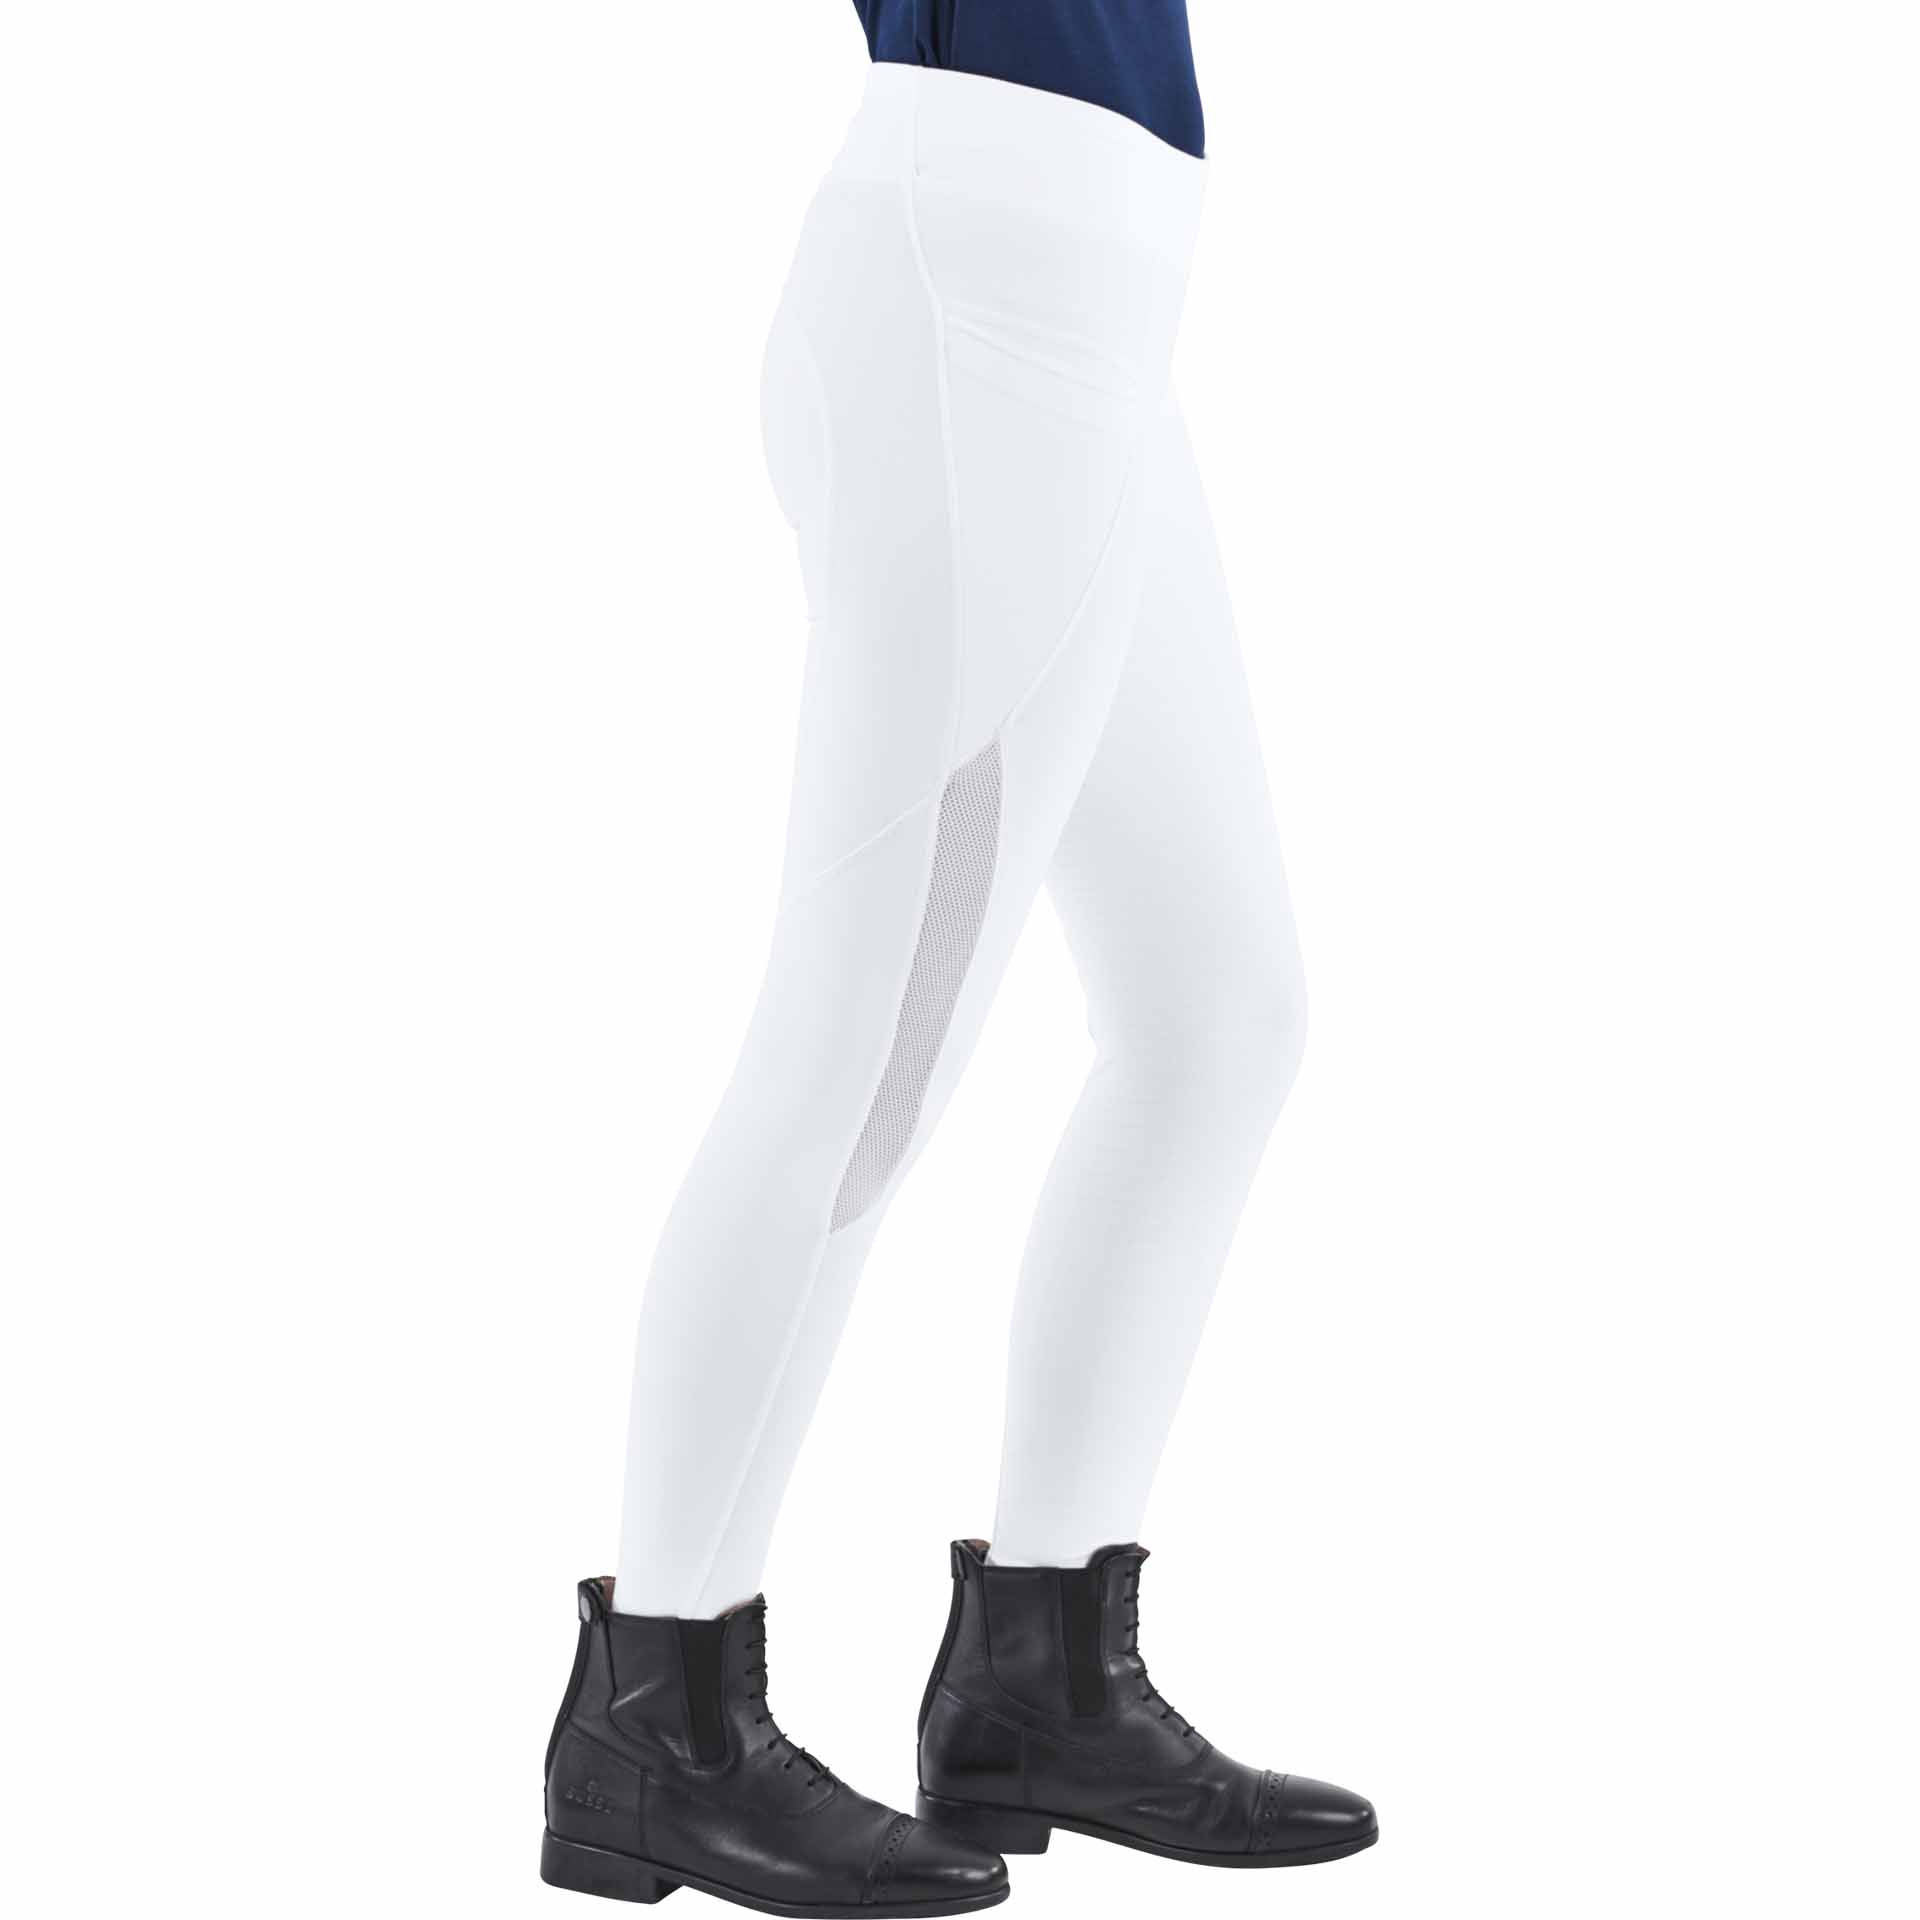 BUSSE Riding Tights VENJA SHOW 40 white